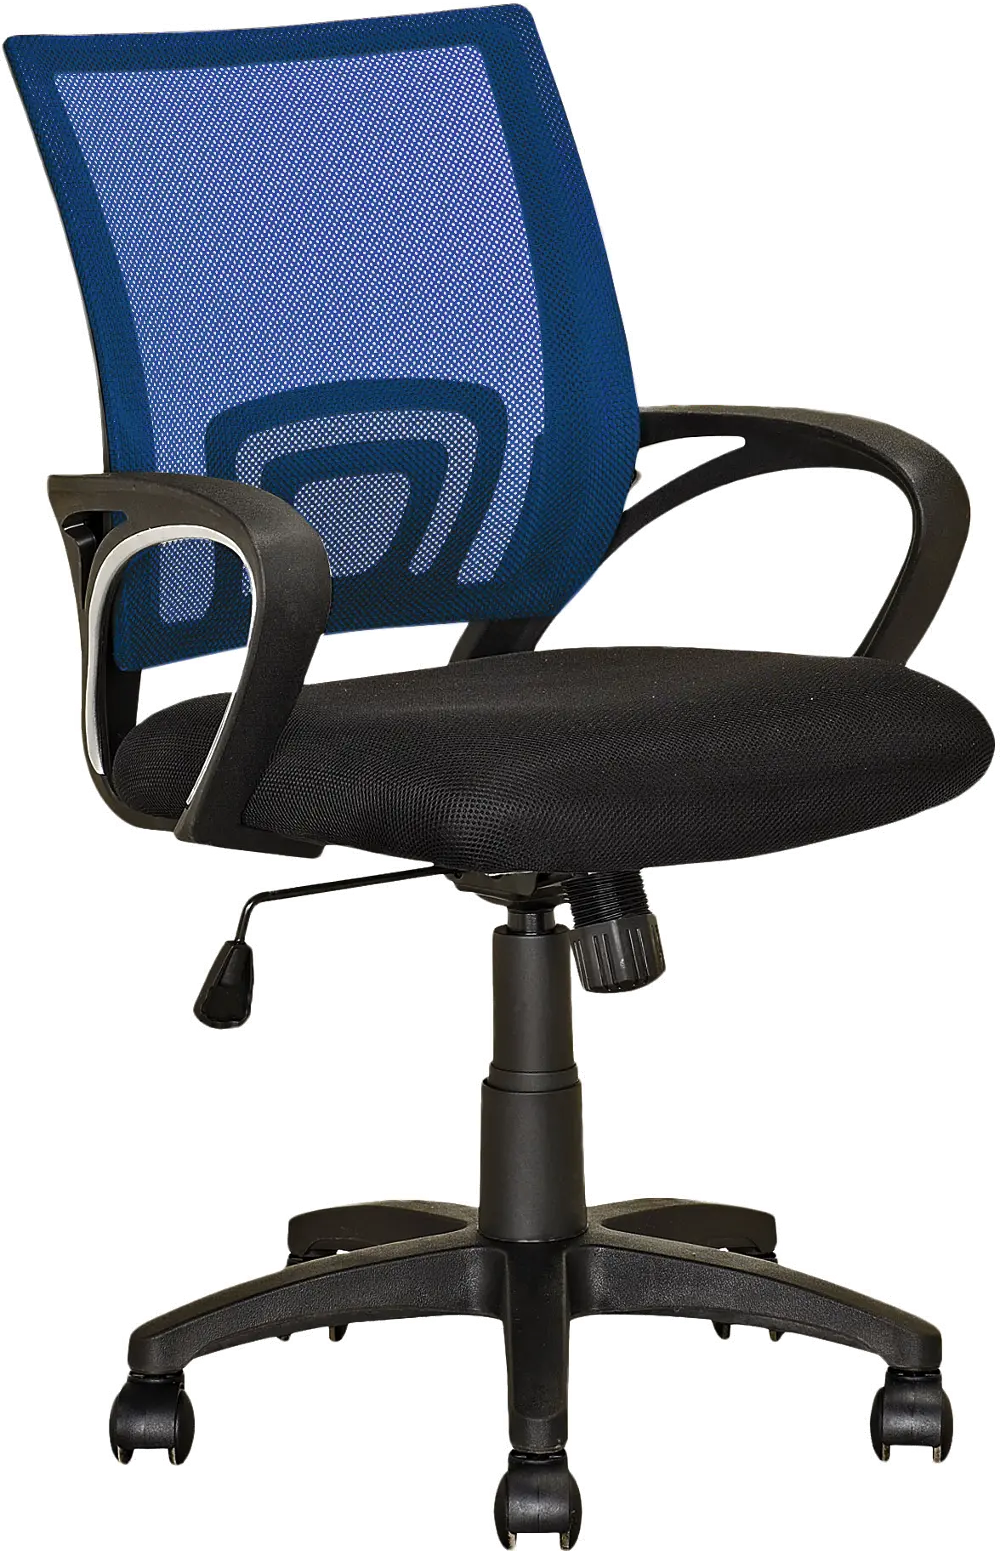 Workspace Navy Blue and Black Mesh Office Chair-1